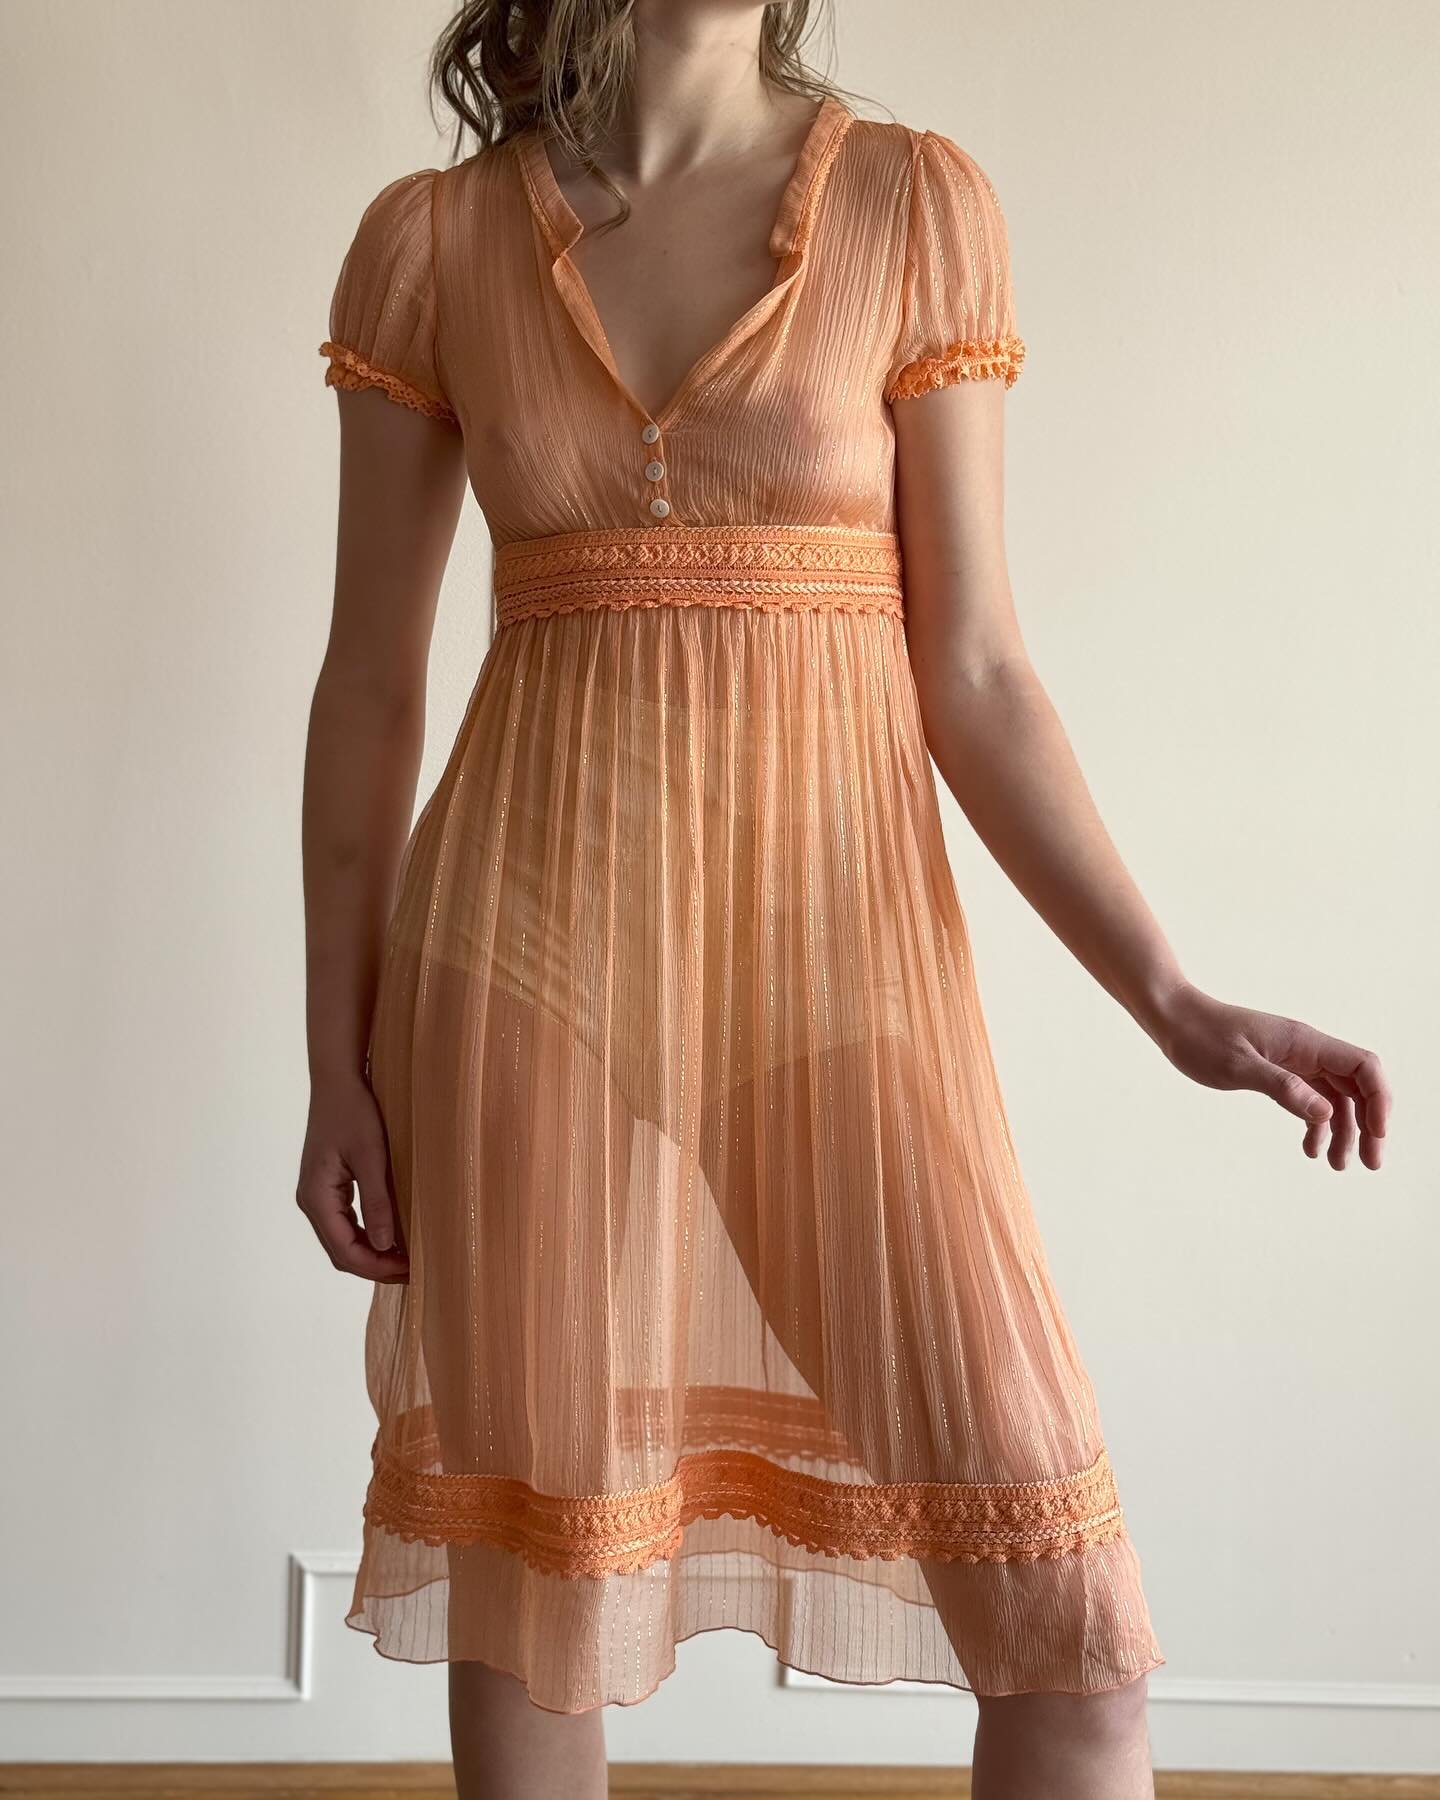 Totally sheer peach mini / XS / S feature on Ava / $64 / DM to purchase / Shipping available